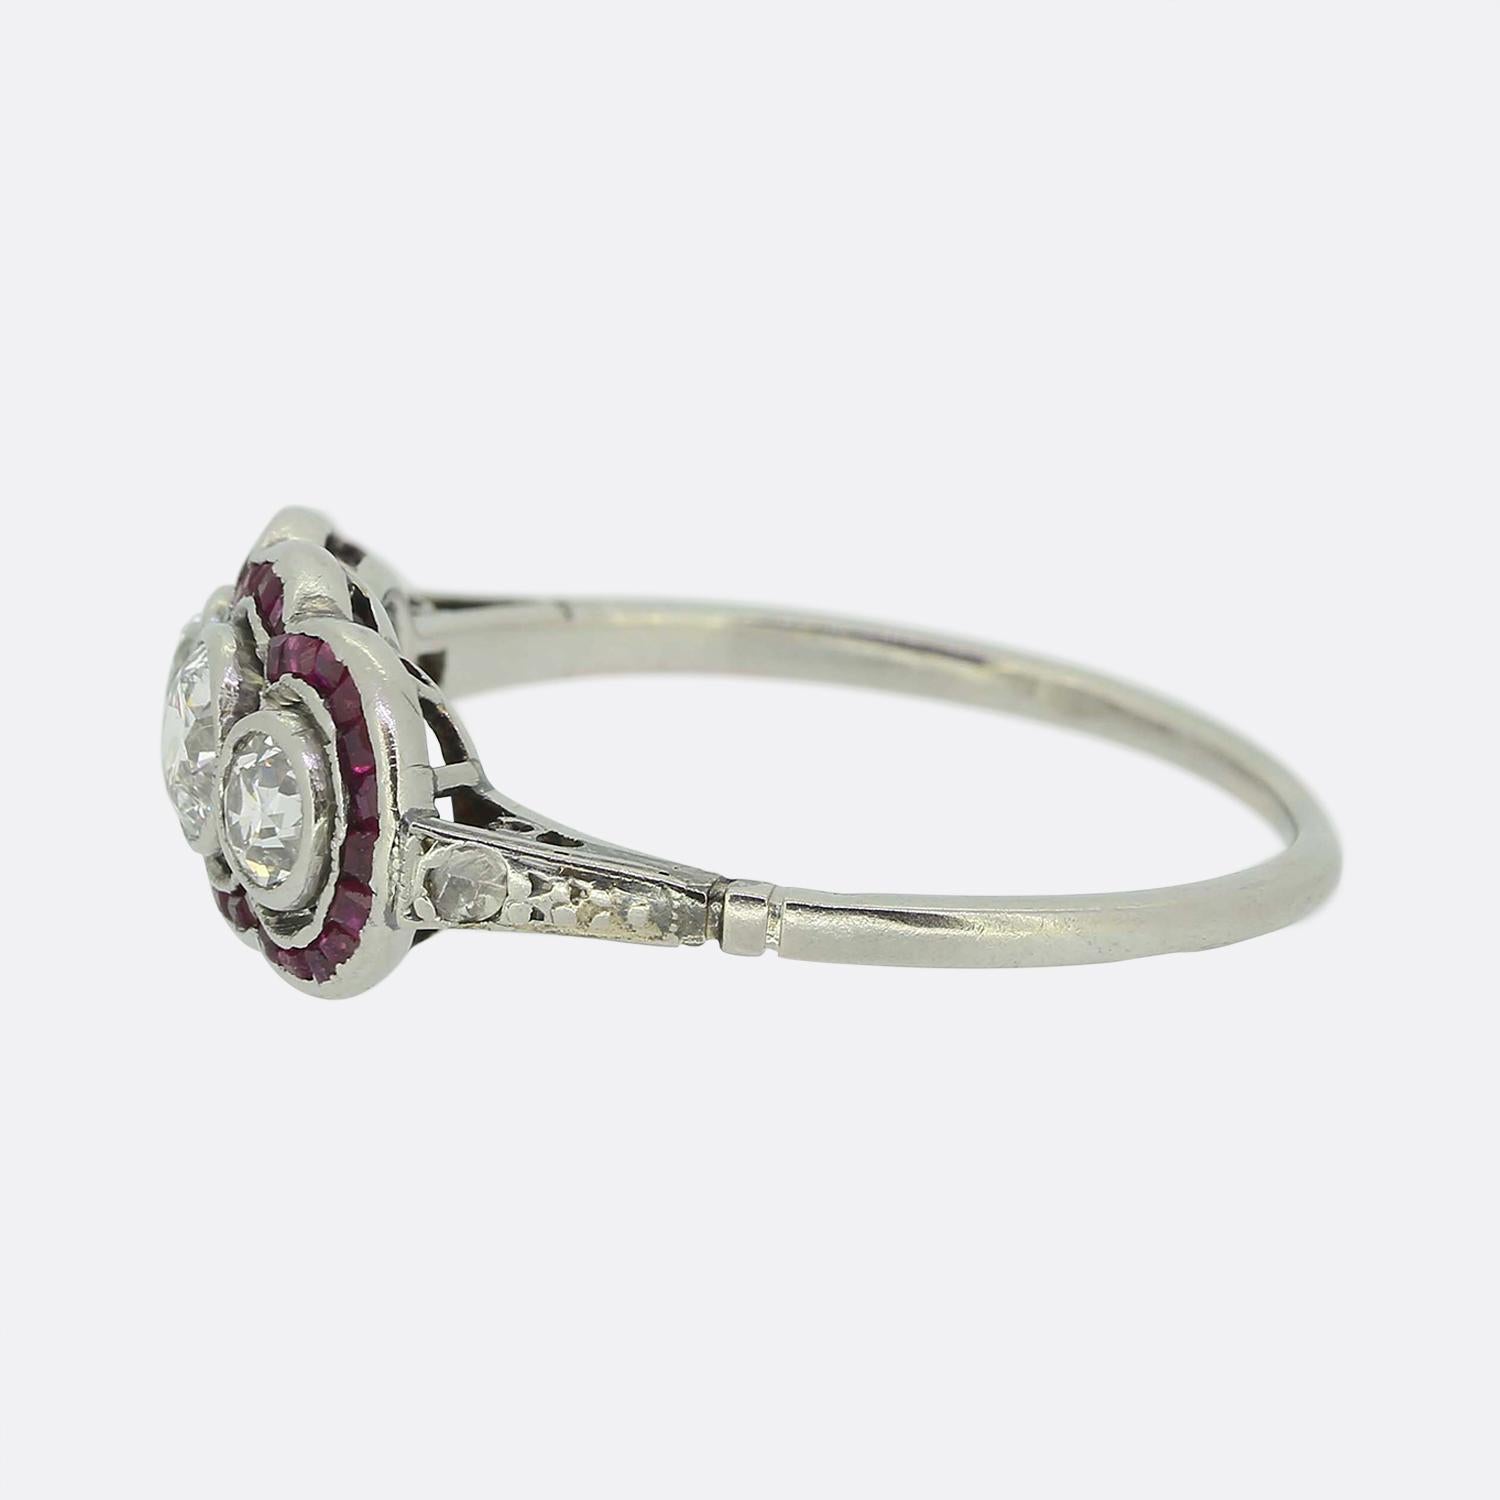 Here we have a gorgeous French Art Deco three- stone diamond ring. A trio of bright white round faceted old European cut diamonds have been individually bezel set at the centre of an open face in a slight concave fashion and then accentuated by a